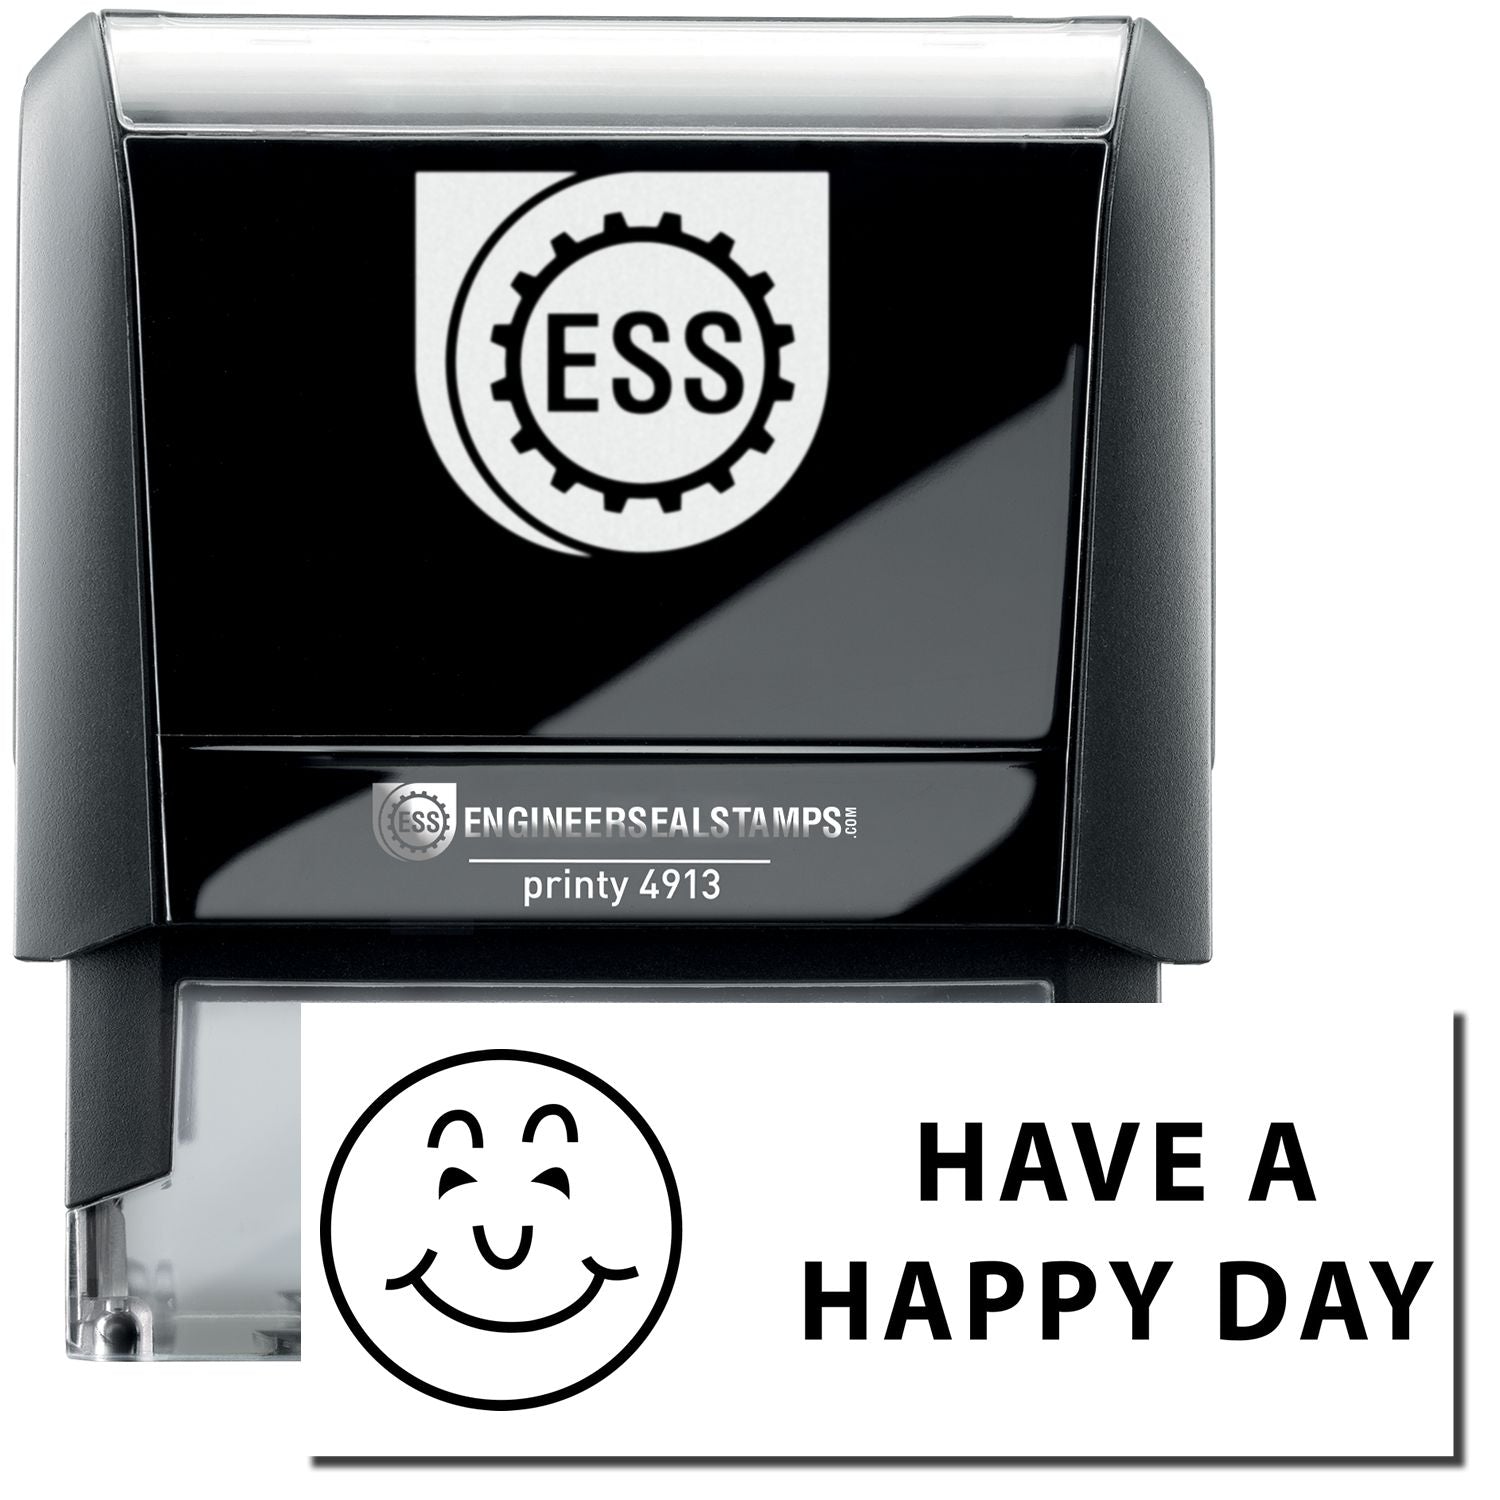 A self-inking stamp with a stamped image showing how the text "HAVE A HAPPY DAY" in a large font with an icon of a smiling face next to it is displayed after stamping.